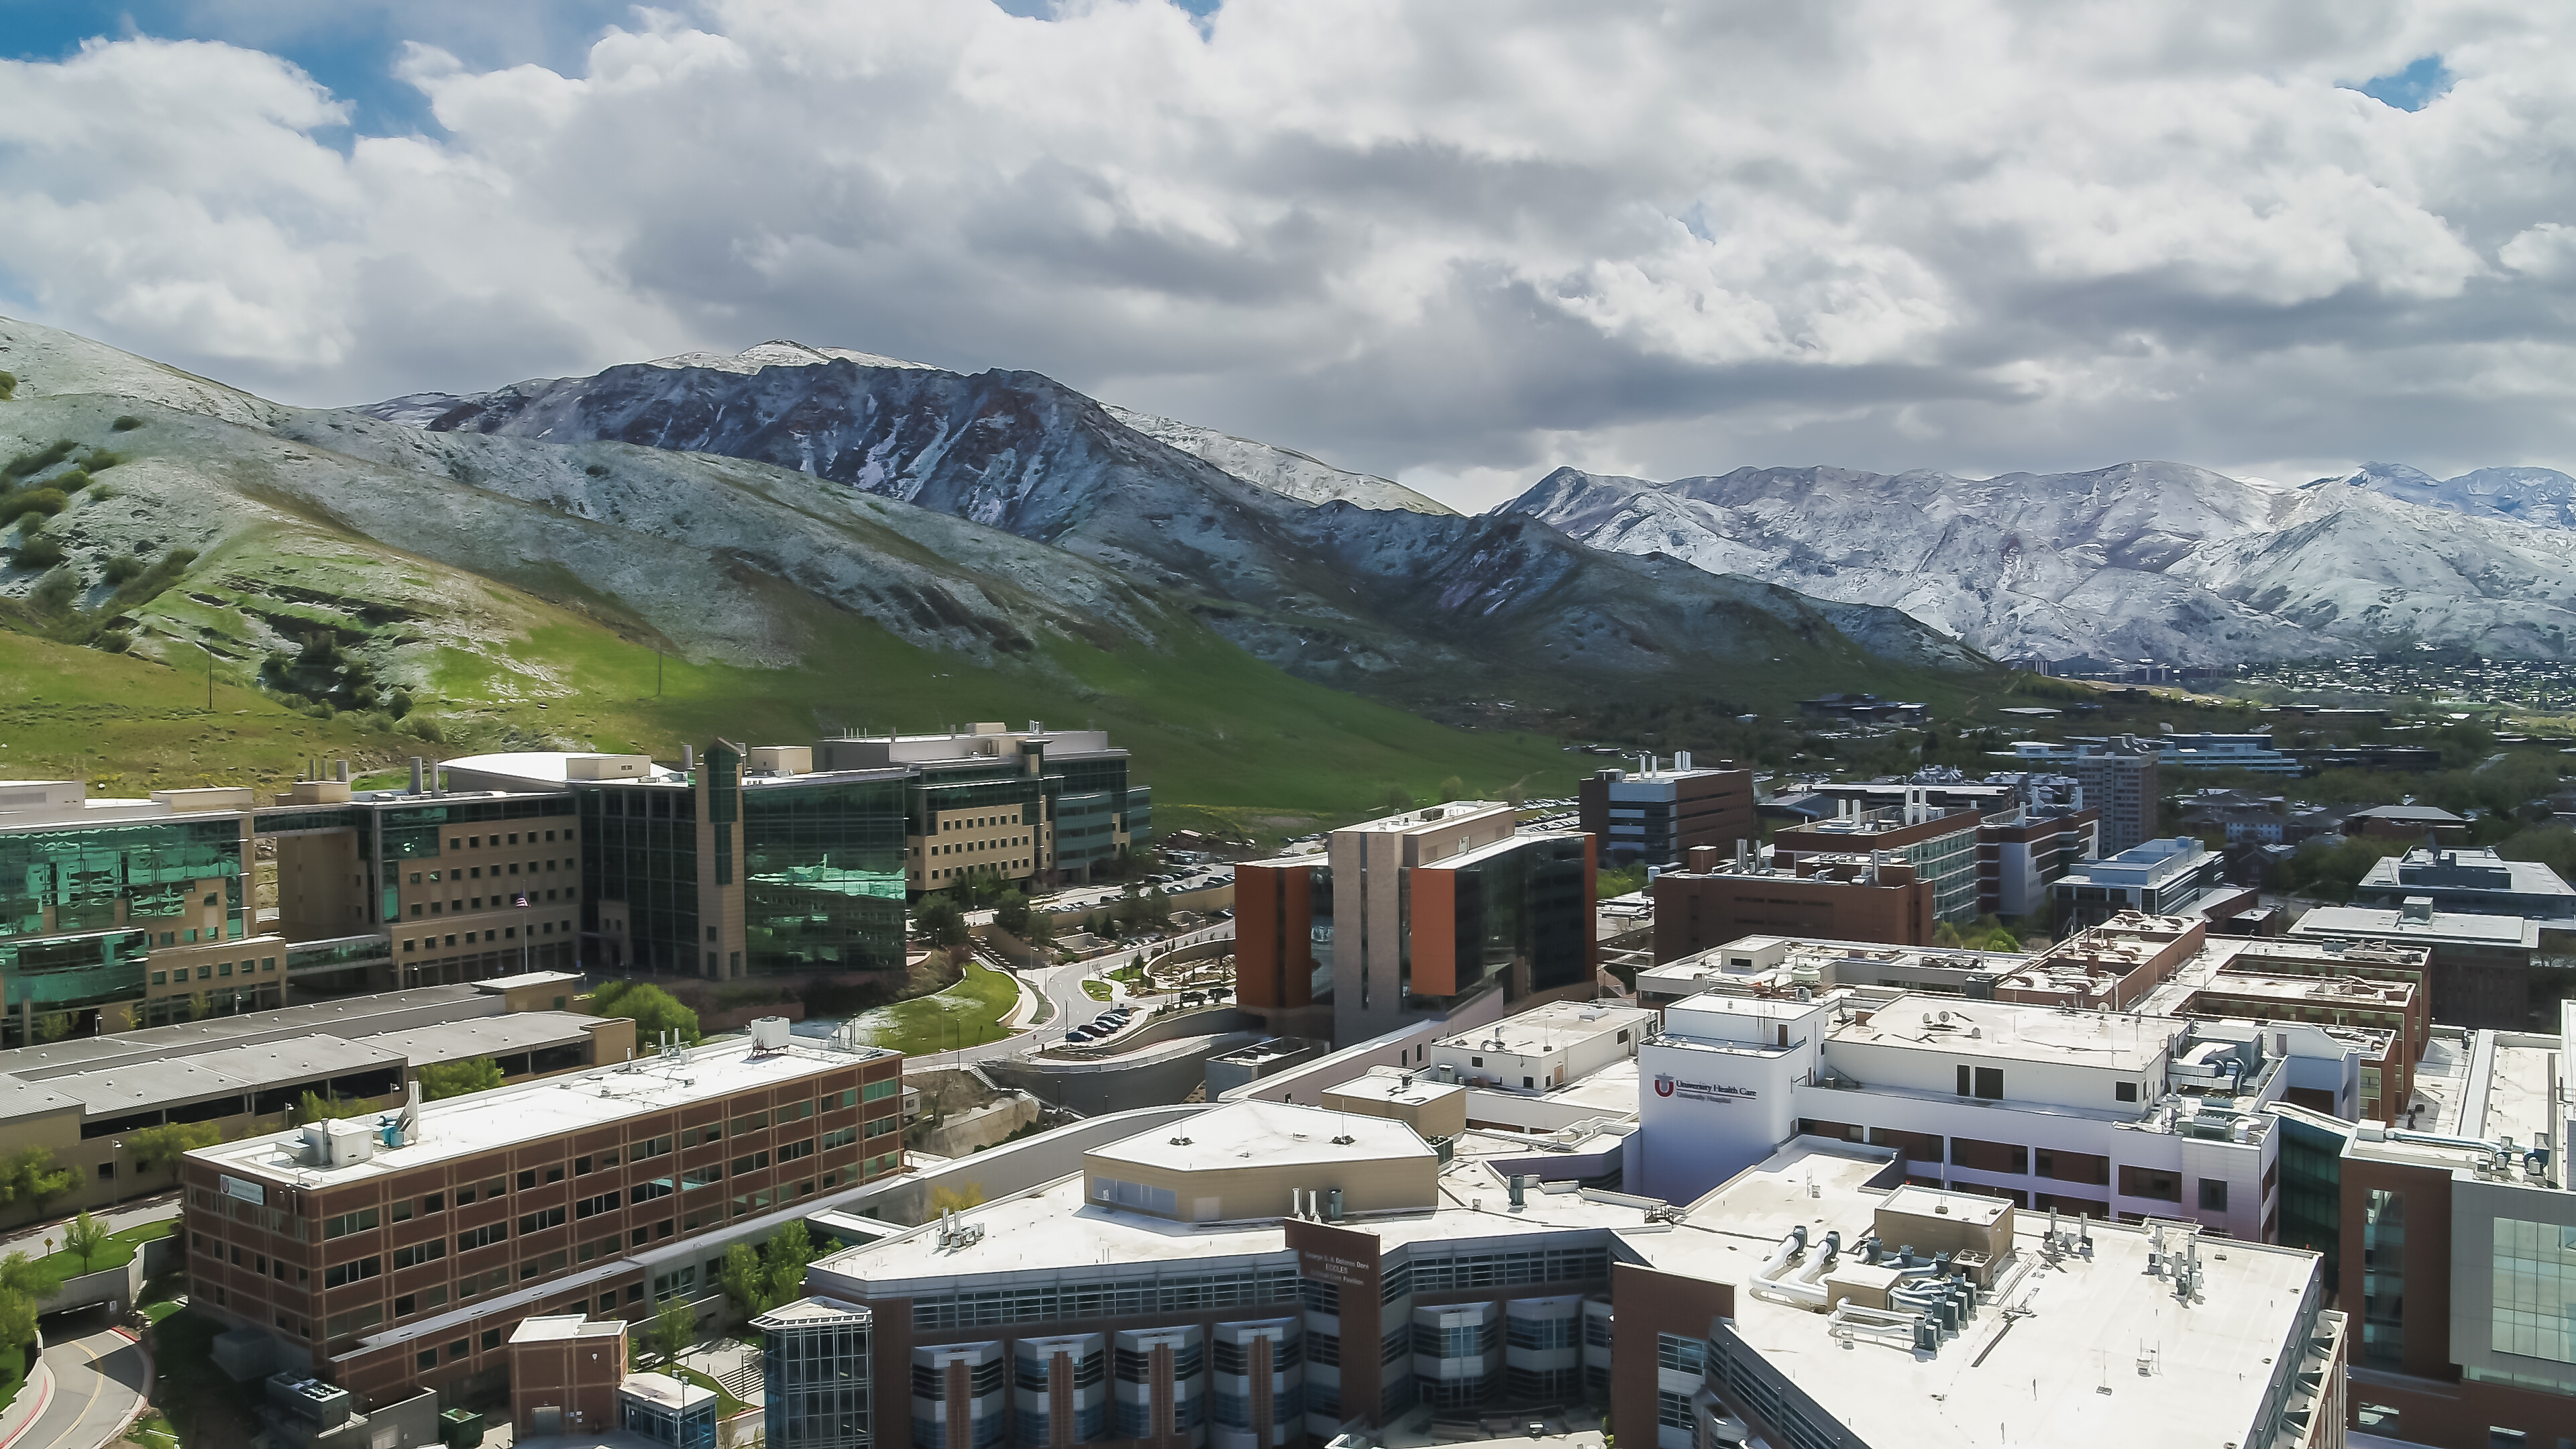 University of Utah Health Sciences Campus with snowy mountains in background